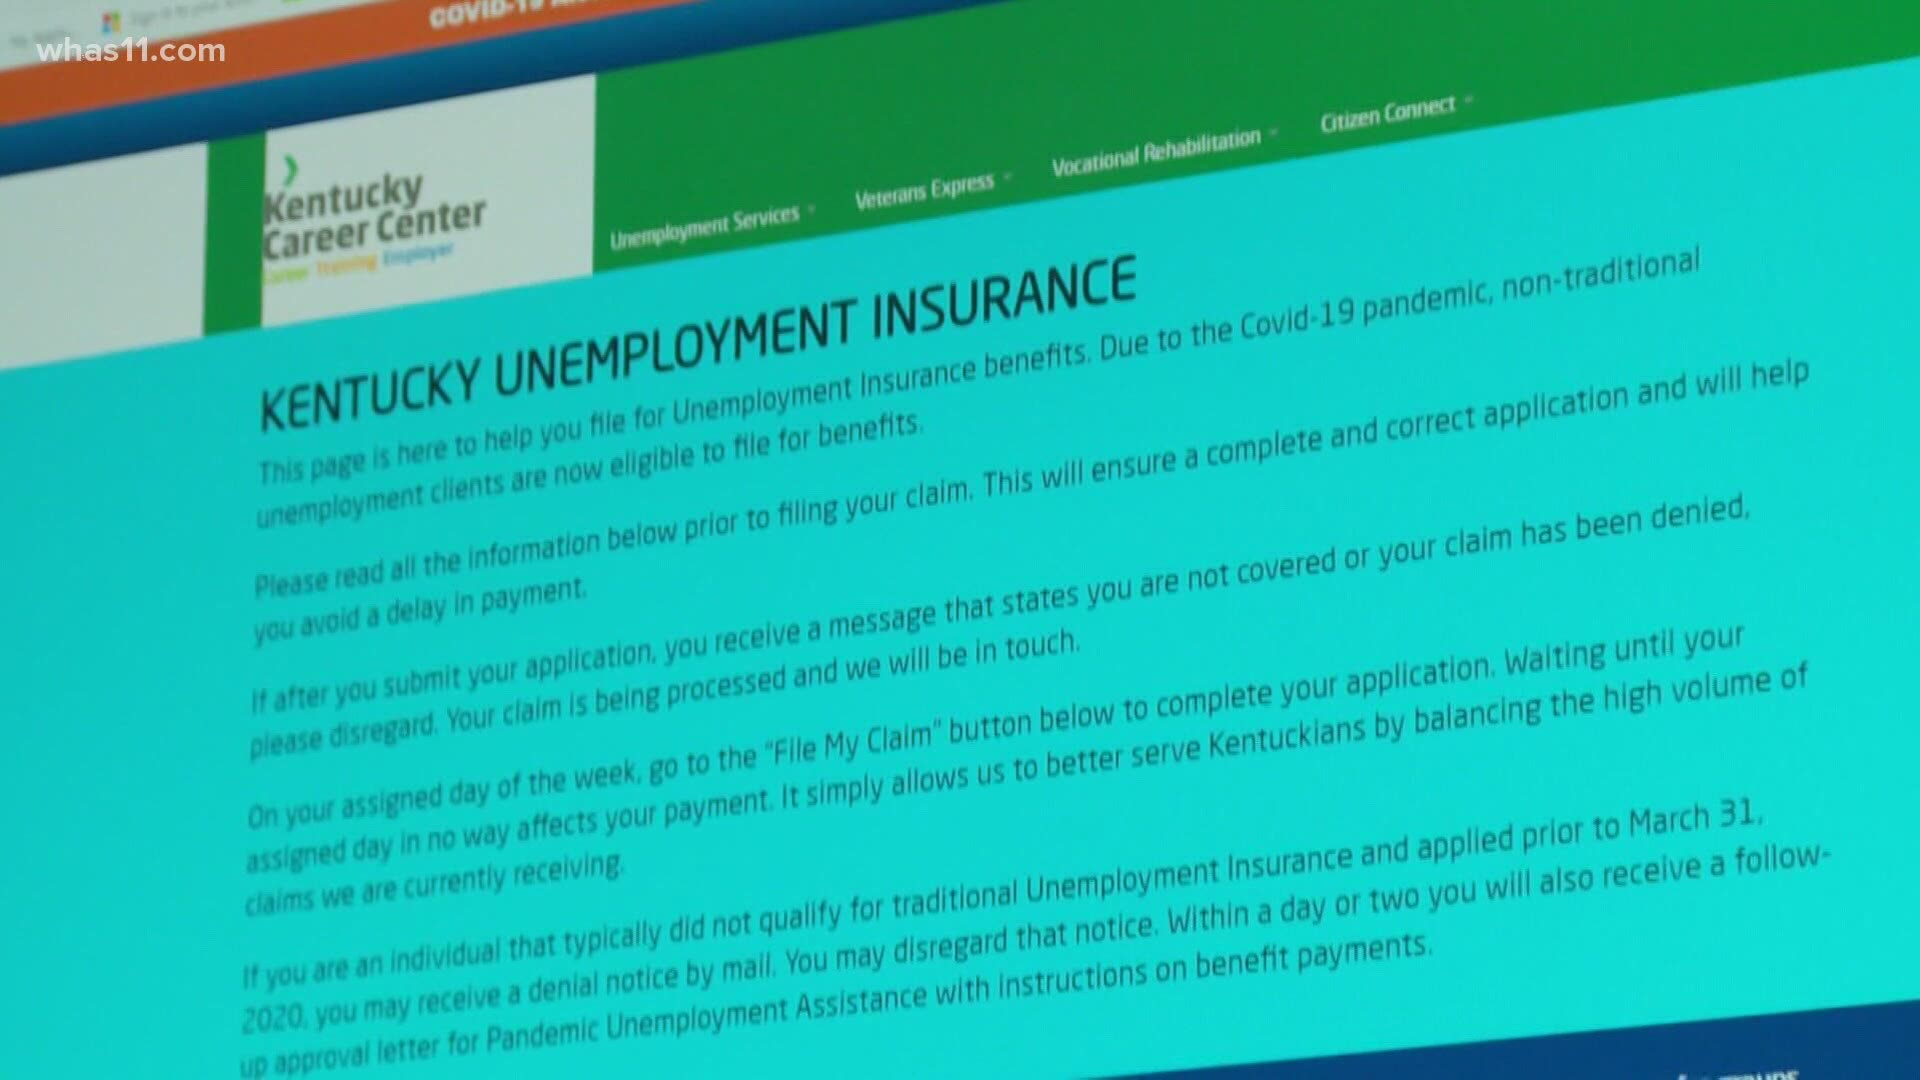 State officials say those receiving unemployment benefits must show proof of a job search in order to continue receiving them.